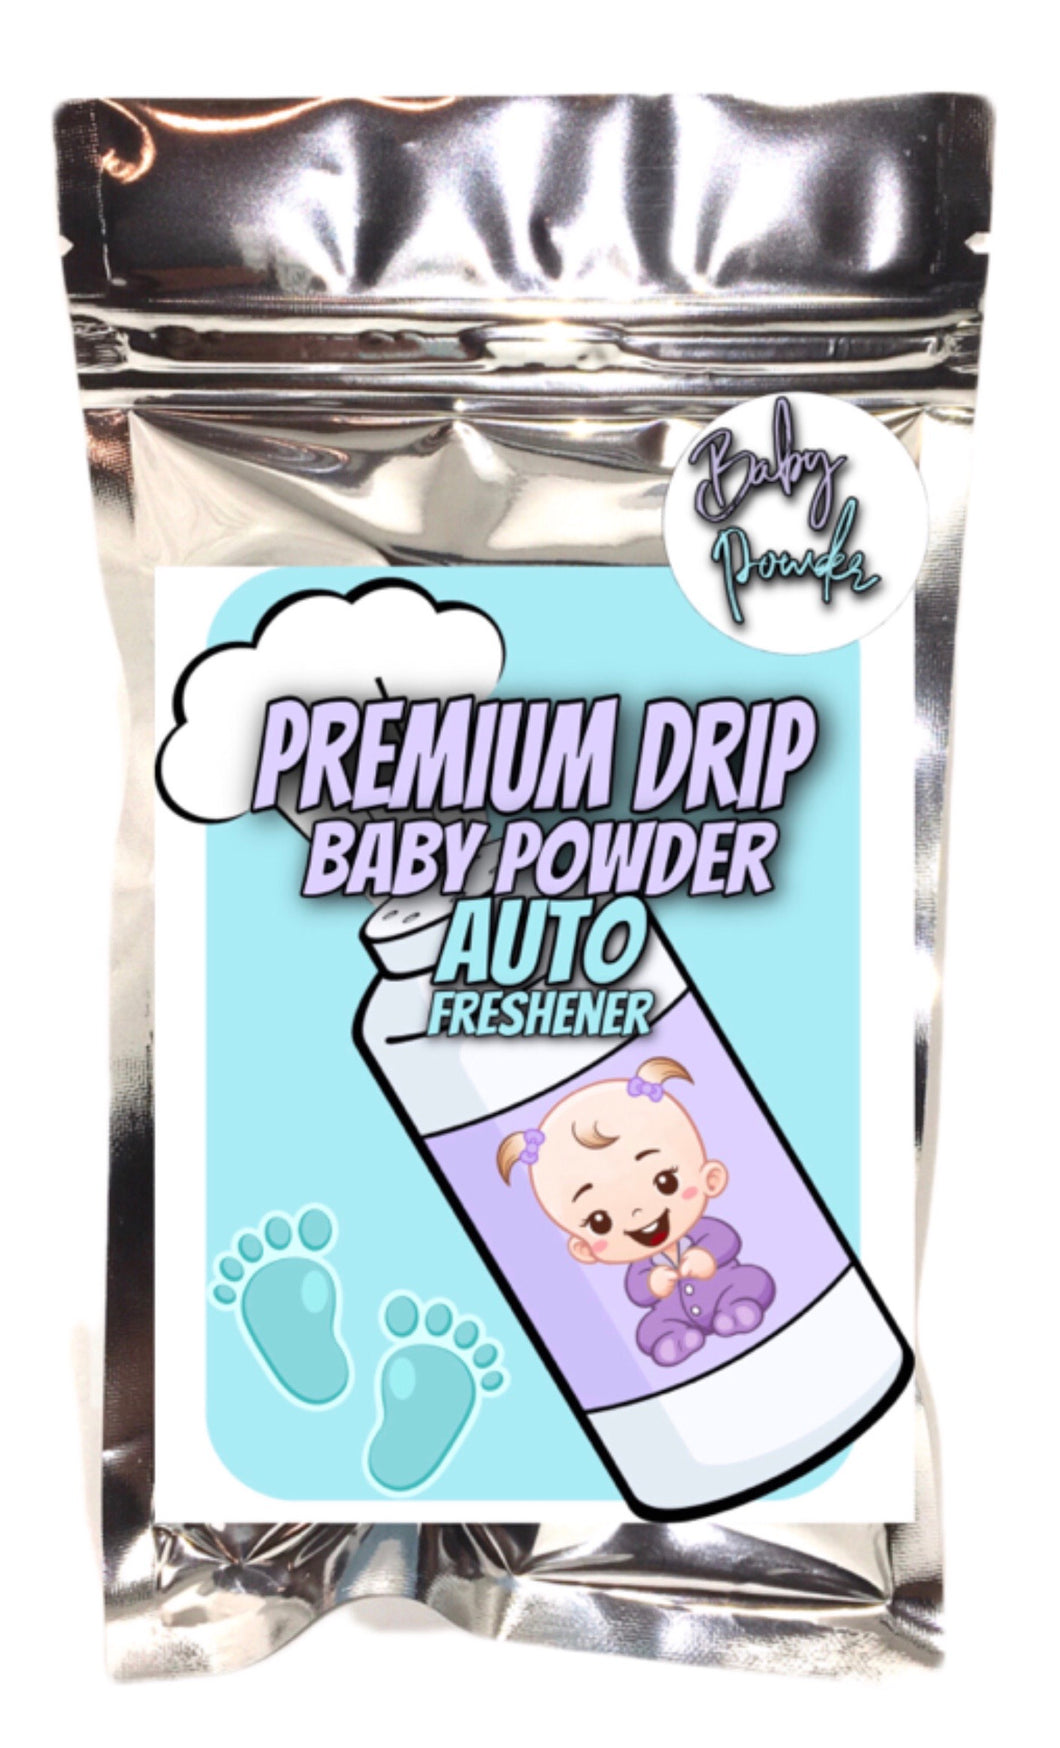 Stay Fresh Baby Powder Scented Air Freshener Smell Like A Baby In Own Your  Car, Remove Grime, Buildup, Car Detailing, Car Freshener